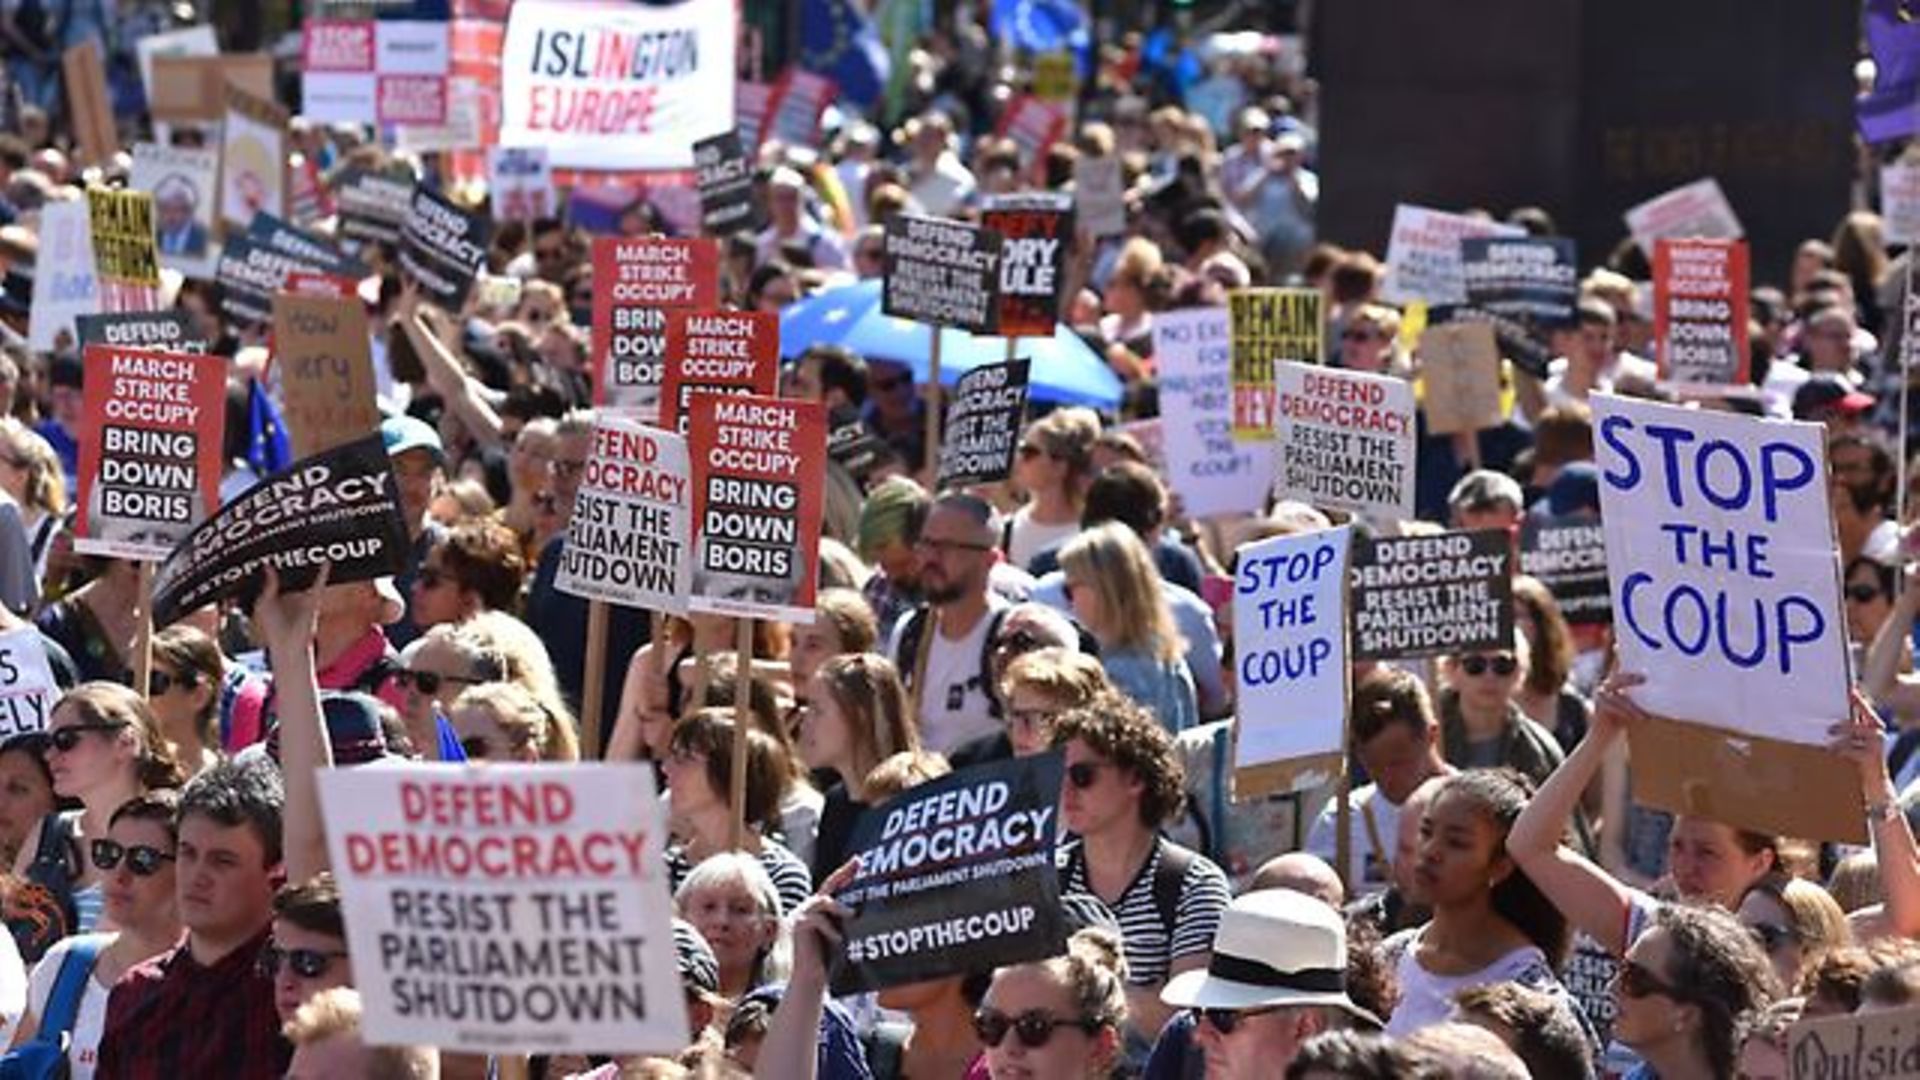 Protesters gather outside Downing Street in 2019 for the Stop The Coup protests - Credit: John Keeble/Getty Images